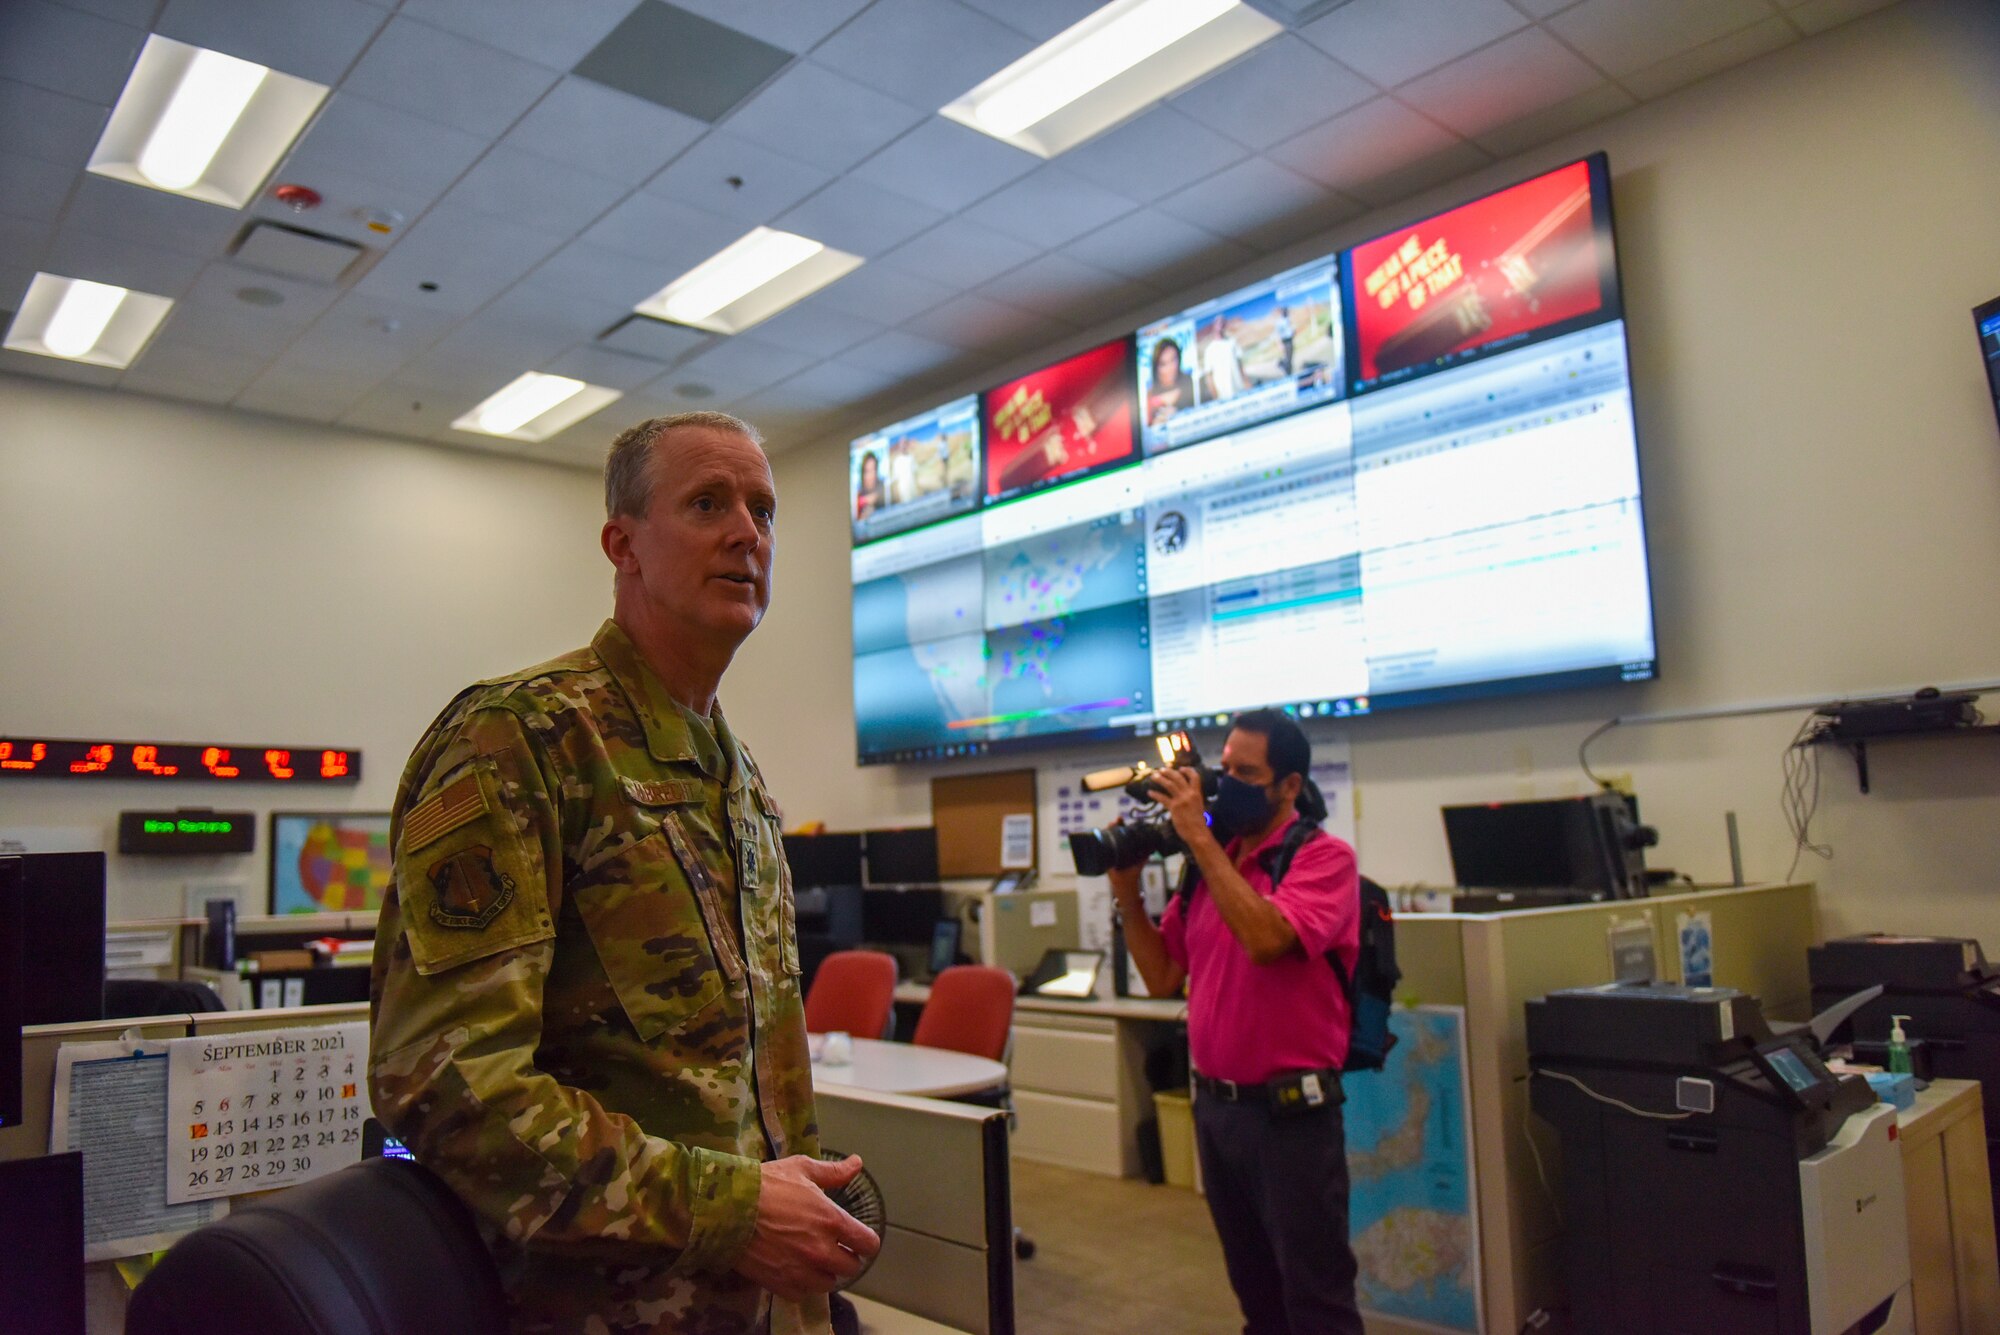 Lt. Col. Thomas Albrecht, chief of the Air Force Reserve Command's Force Generation battle watch, gives media a tour of the FGC battle watch station after a ceremony celebrating the 10th anniversary of AFRC's FGC at Robins Air Force Base, Georgia, Oct. 1, 2021. The battle watch is a command and control center that operates 24/7 to provide support to Air Force Reserve missions around the world. The FGC is the single organization responsible for generating Air Force Reserve forces by leveraging Reserve strategic capability to meet operational needs in support of the global force. The Reserve Citizen Airmen who support the FGC perform all aspects of force generation to include oversight, visibility and accountability of more than 70,000 Air Force Reserve forces. (U.S. Air Force photo by Misuzu Allen)